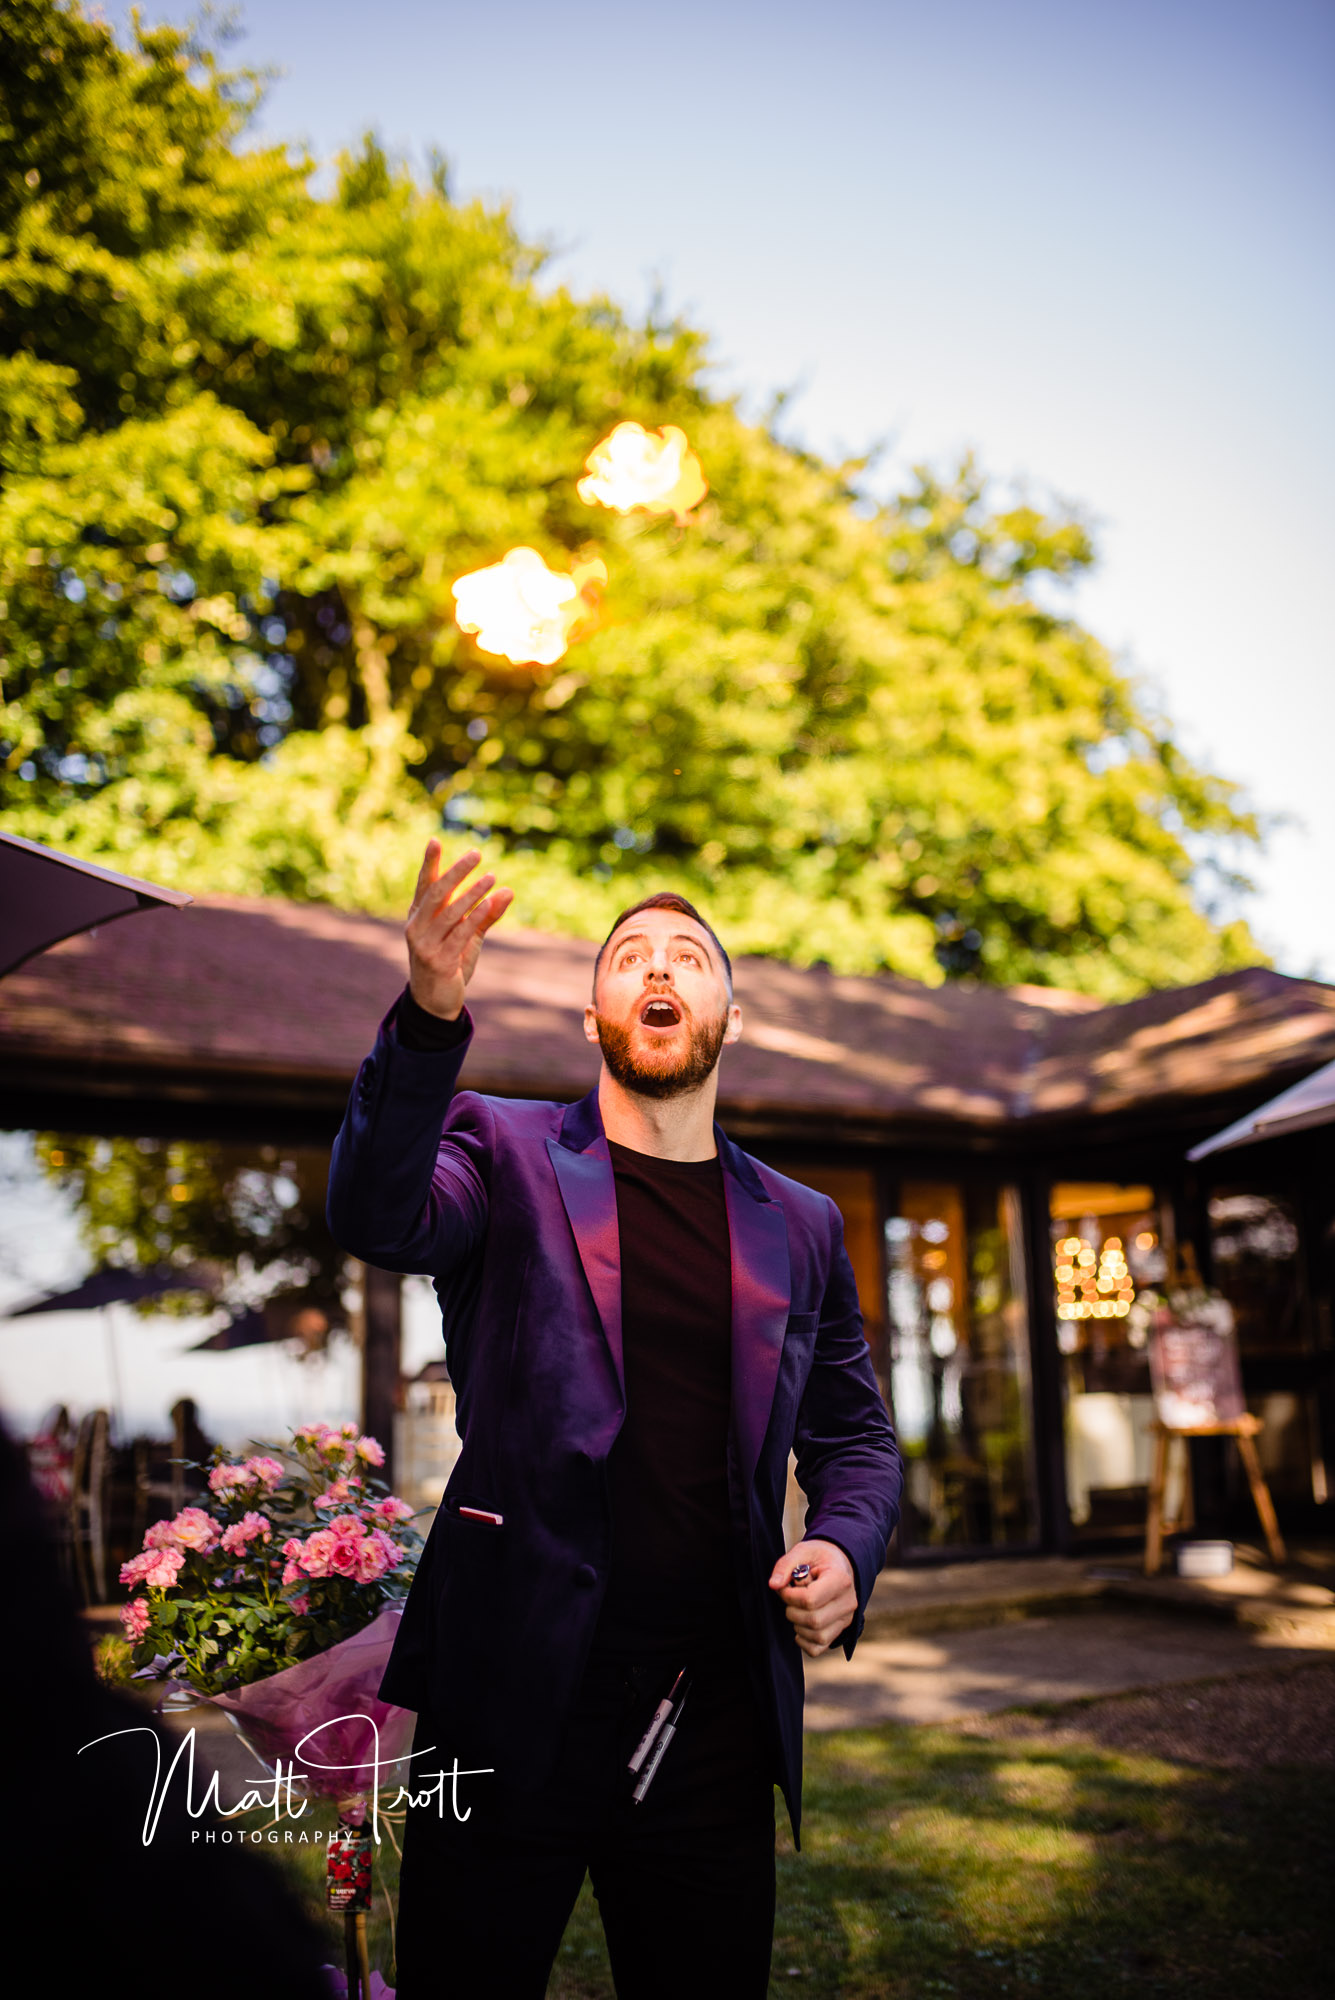 Magician throwing fire into the air at crown lodge kent during a wedding